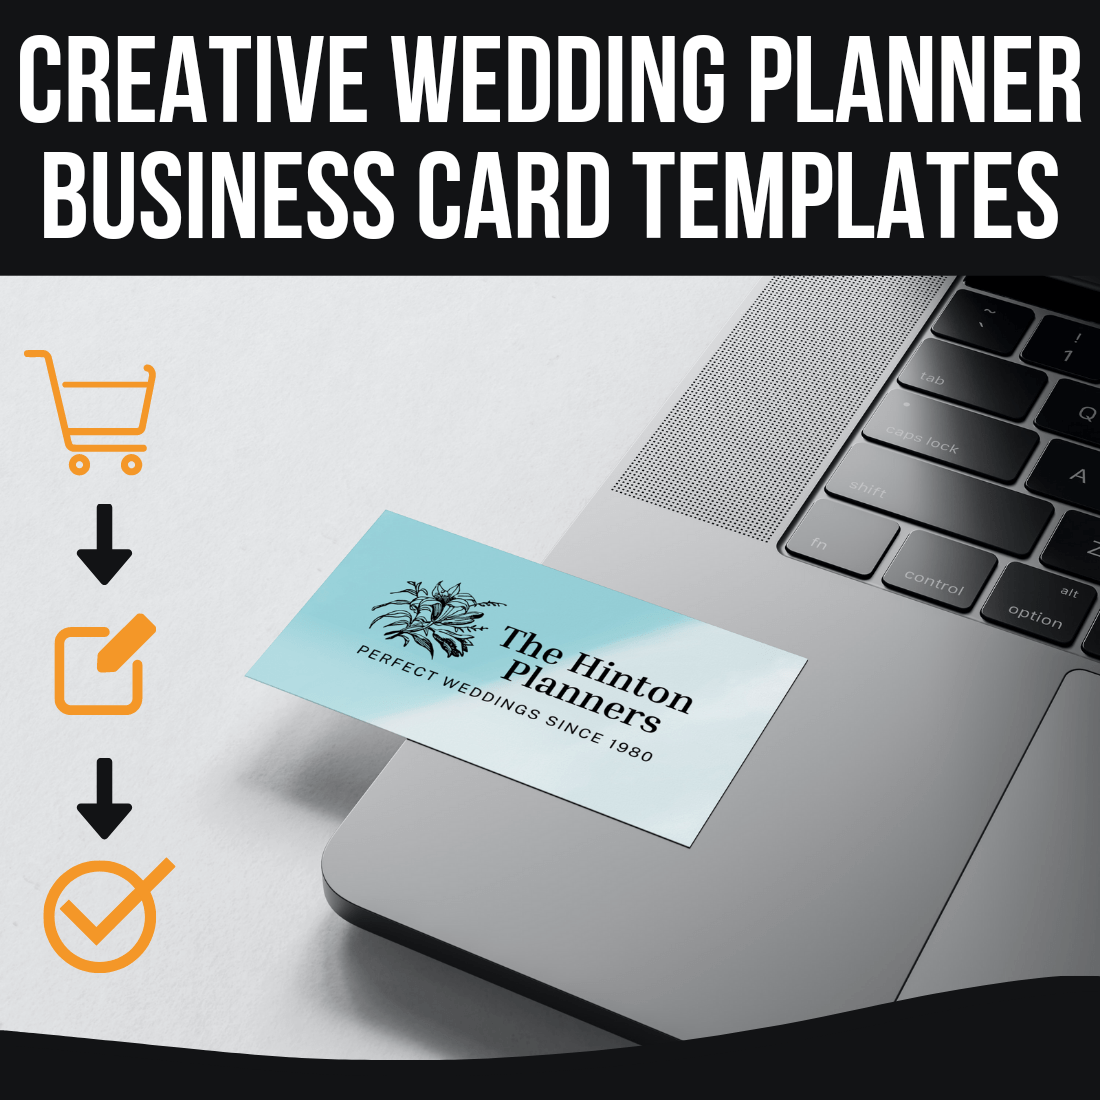 Creative And Modern Wedding Planner Business Card Templates cover image.